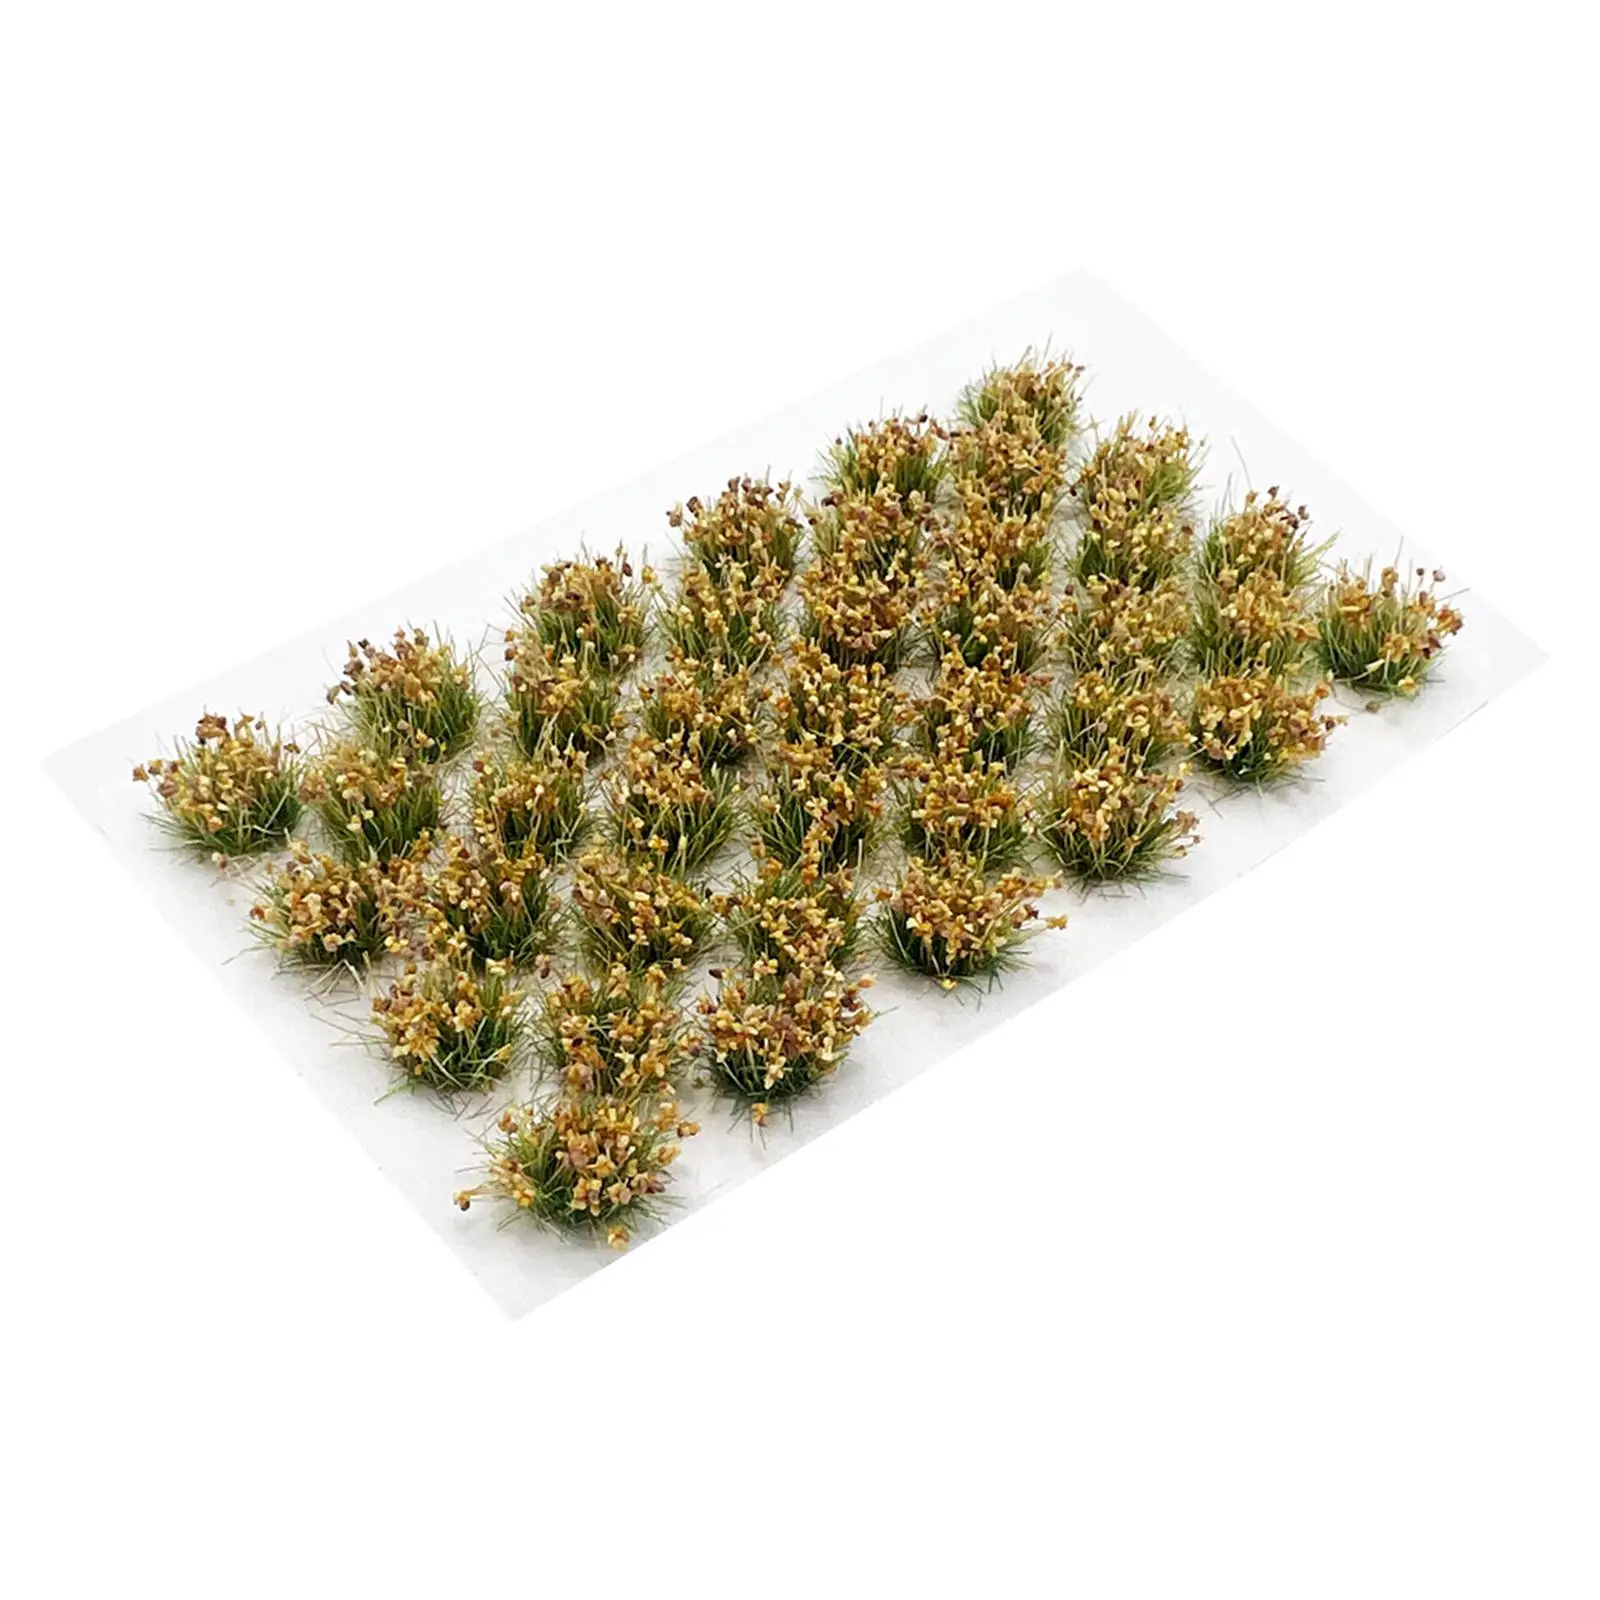 Cluster Grass Static Scenery Model for 1:35 1:48 1:72 1:87 Countryside Dioramas Scenery